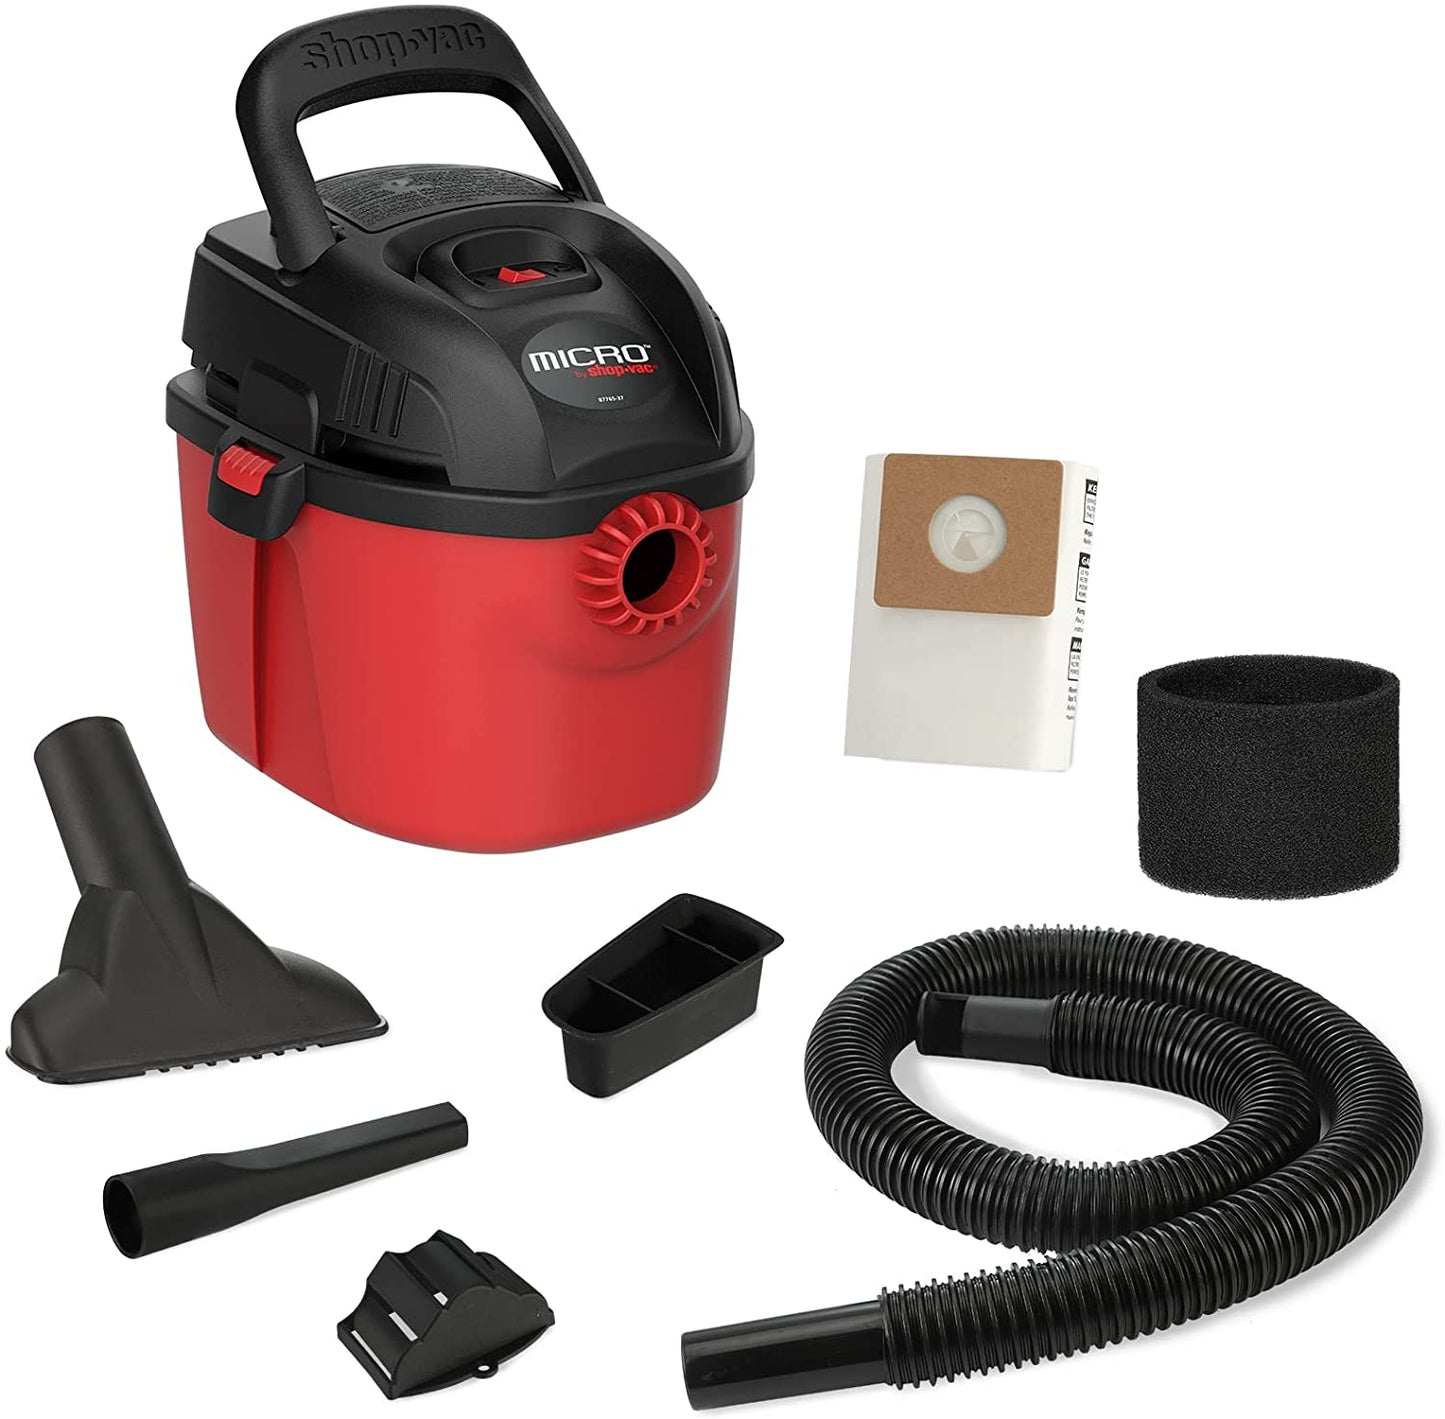 Micro Wet/Dry Vac, Portable 1 Gallon 1.0 Peak Shop Vacuum with Collapsible Handle and Wall Bracket, 2021000